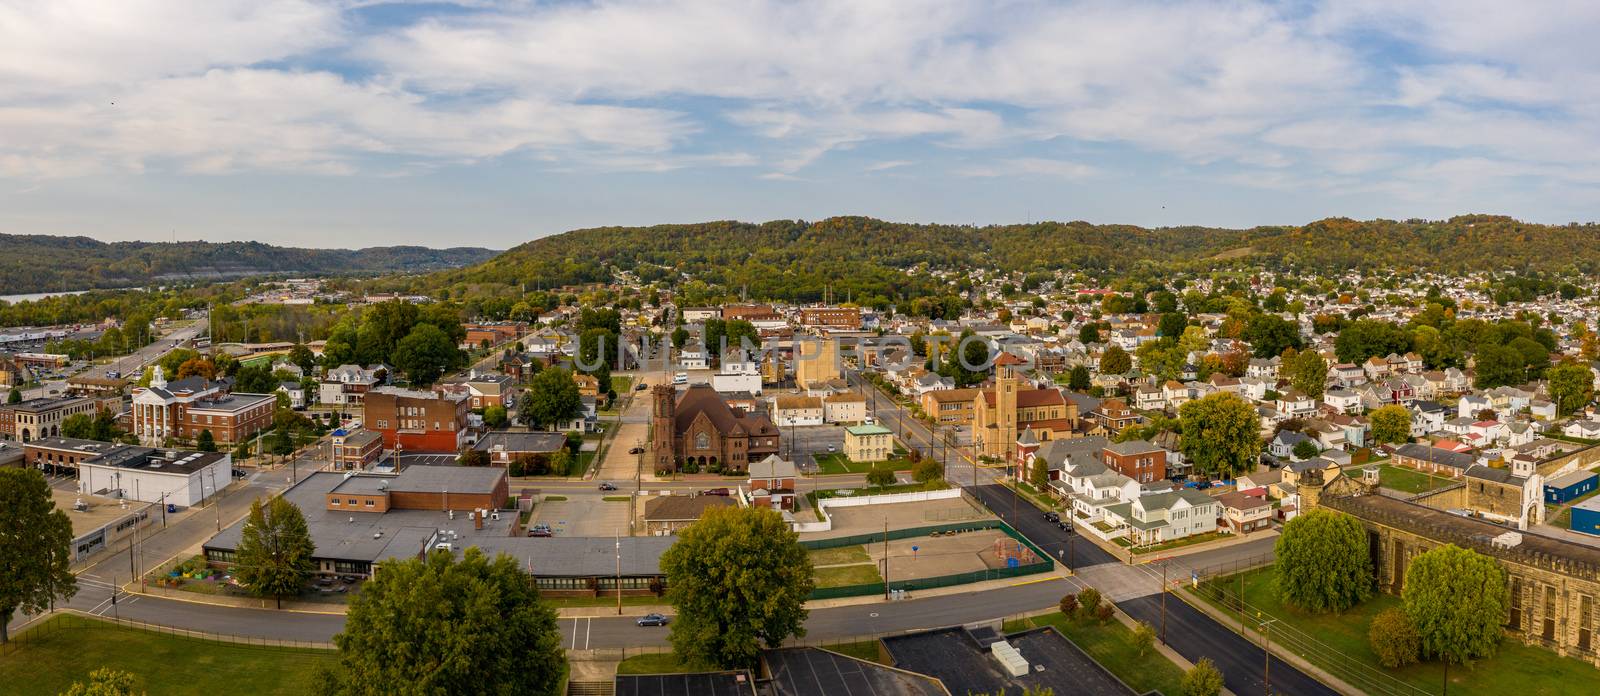 Aerial panorama of the city of Moundsville in West Virginia by steheap